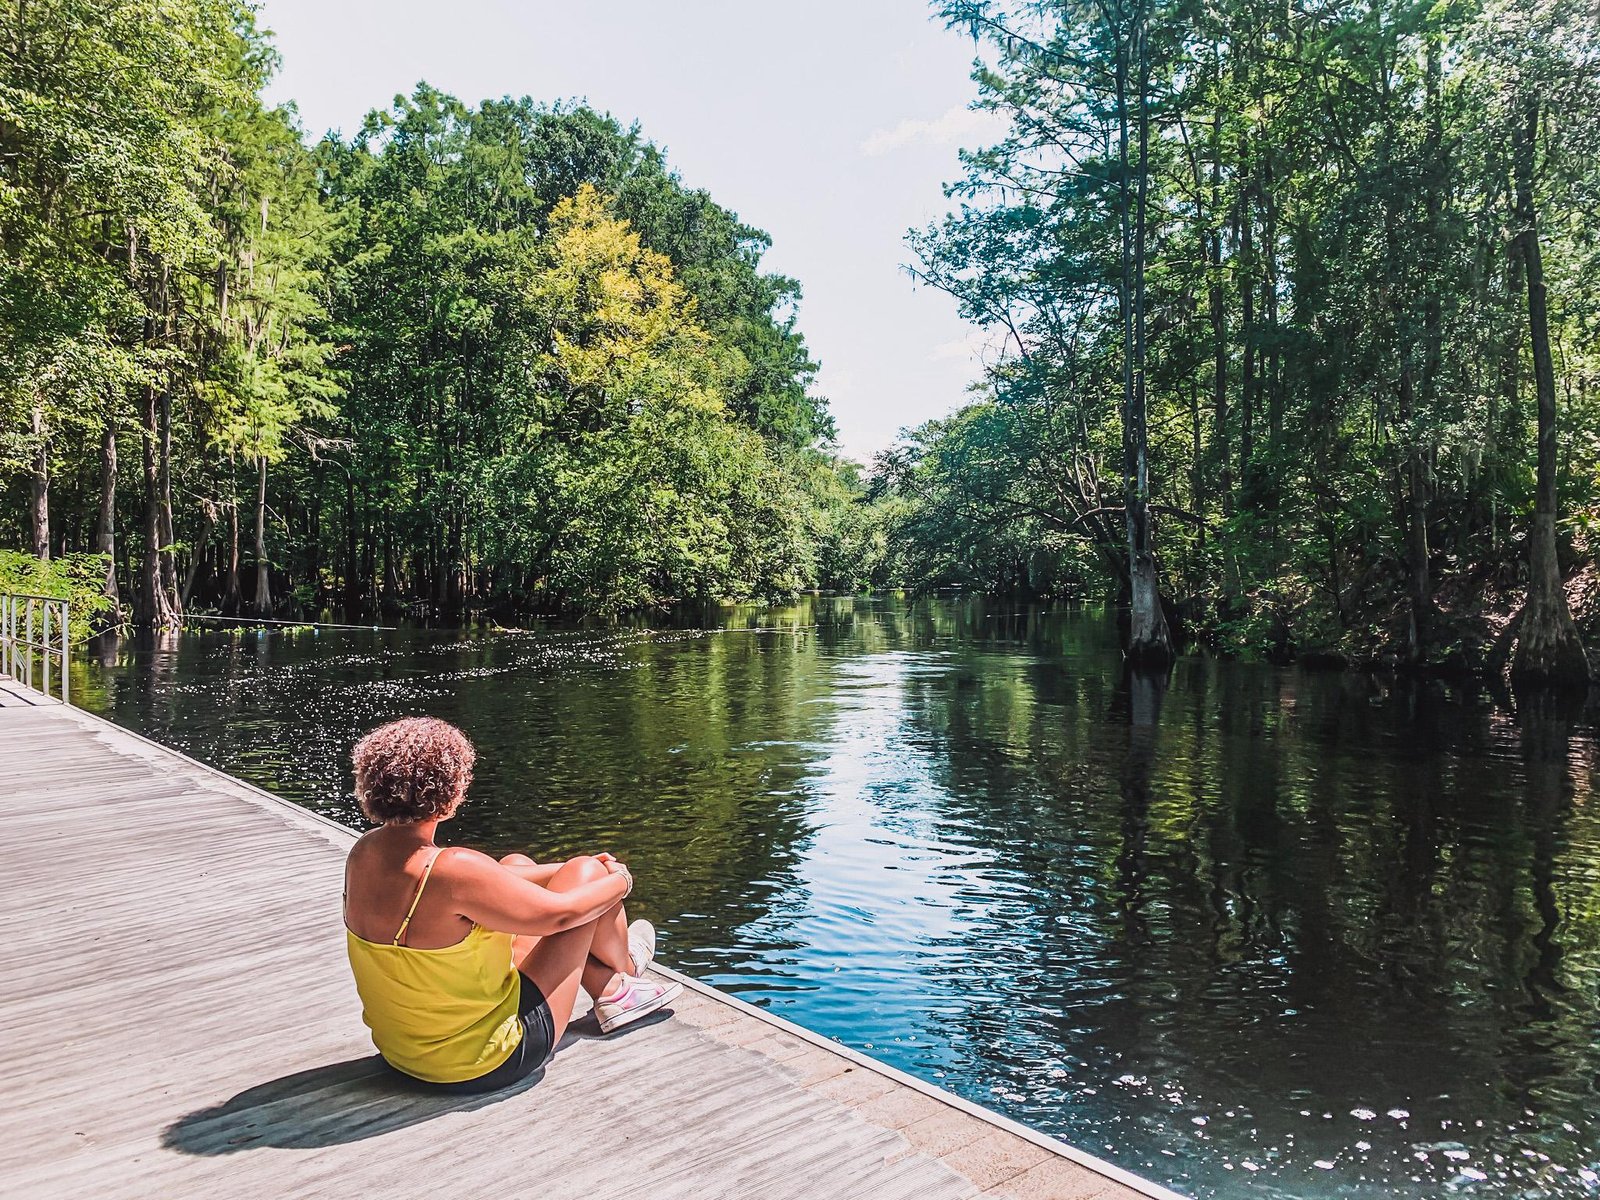 outdoorsy vibes in o'leno state park